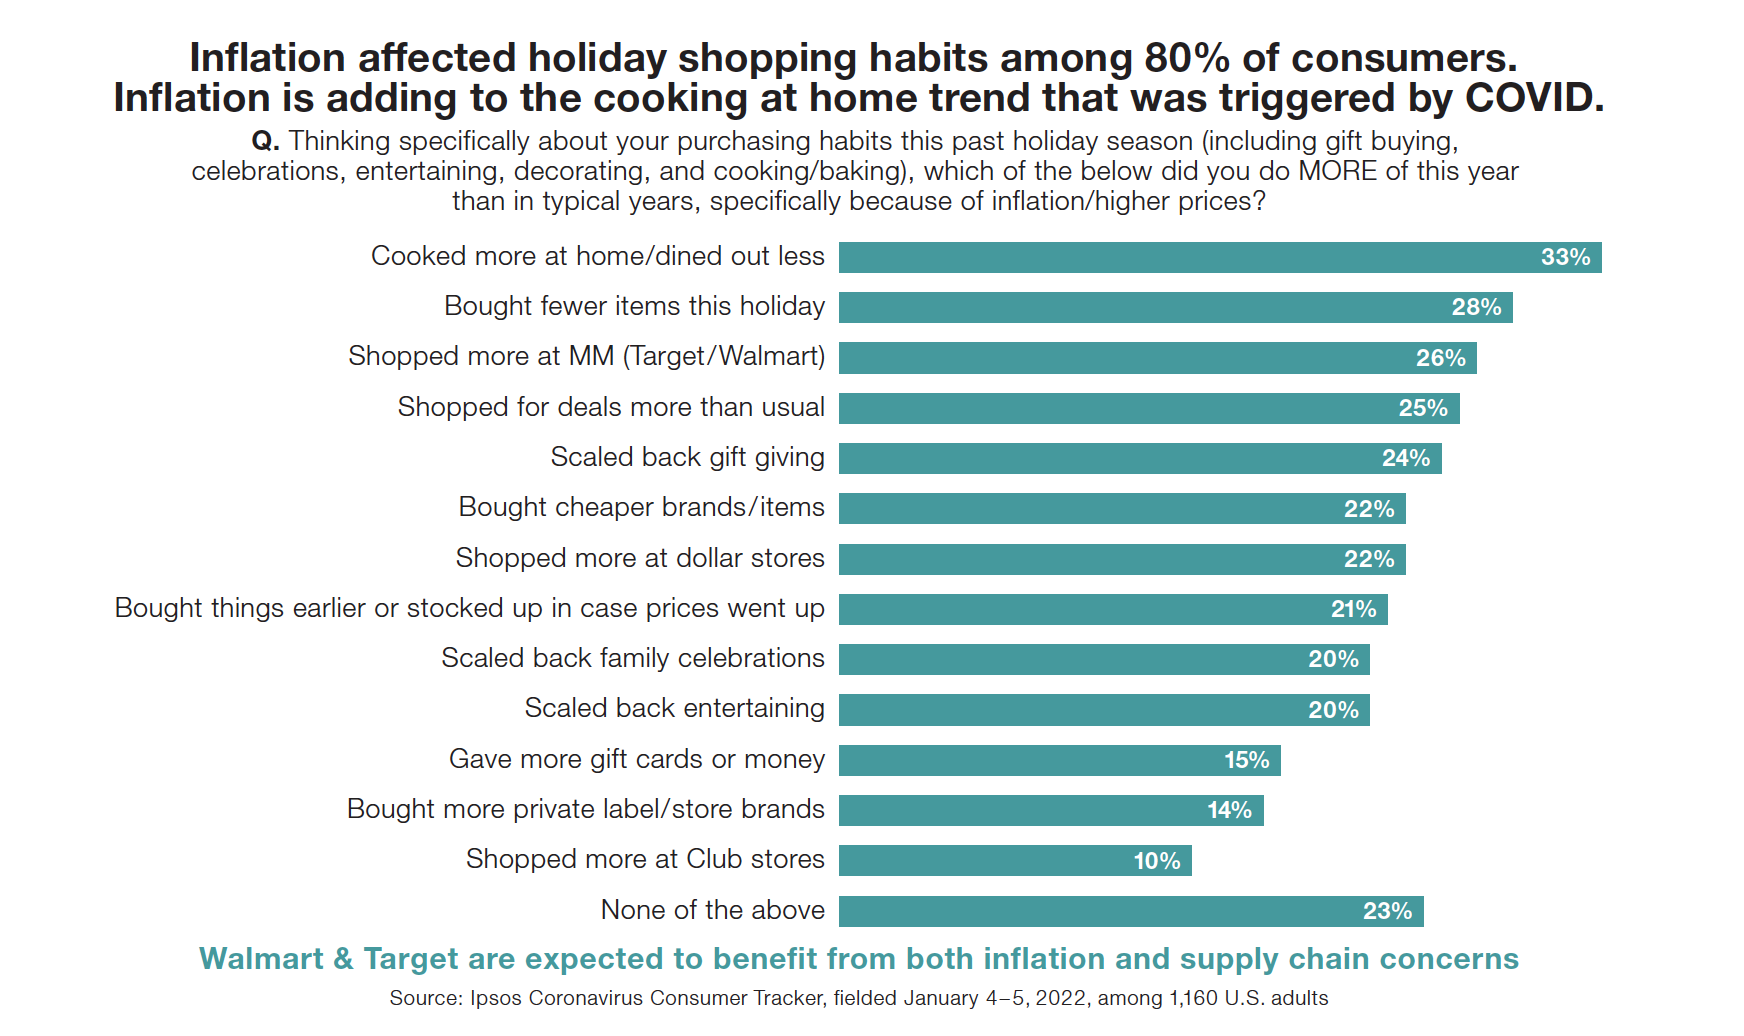 Inflation affected holiday shopping habits among 80% of consumers. Inflation is adding to the cooking at home trend that was triggered by COVID.